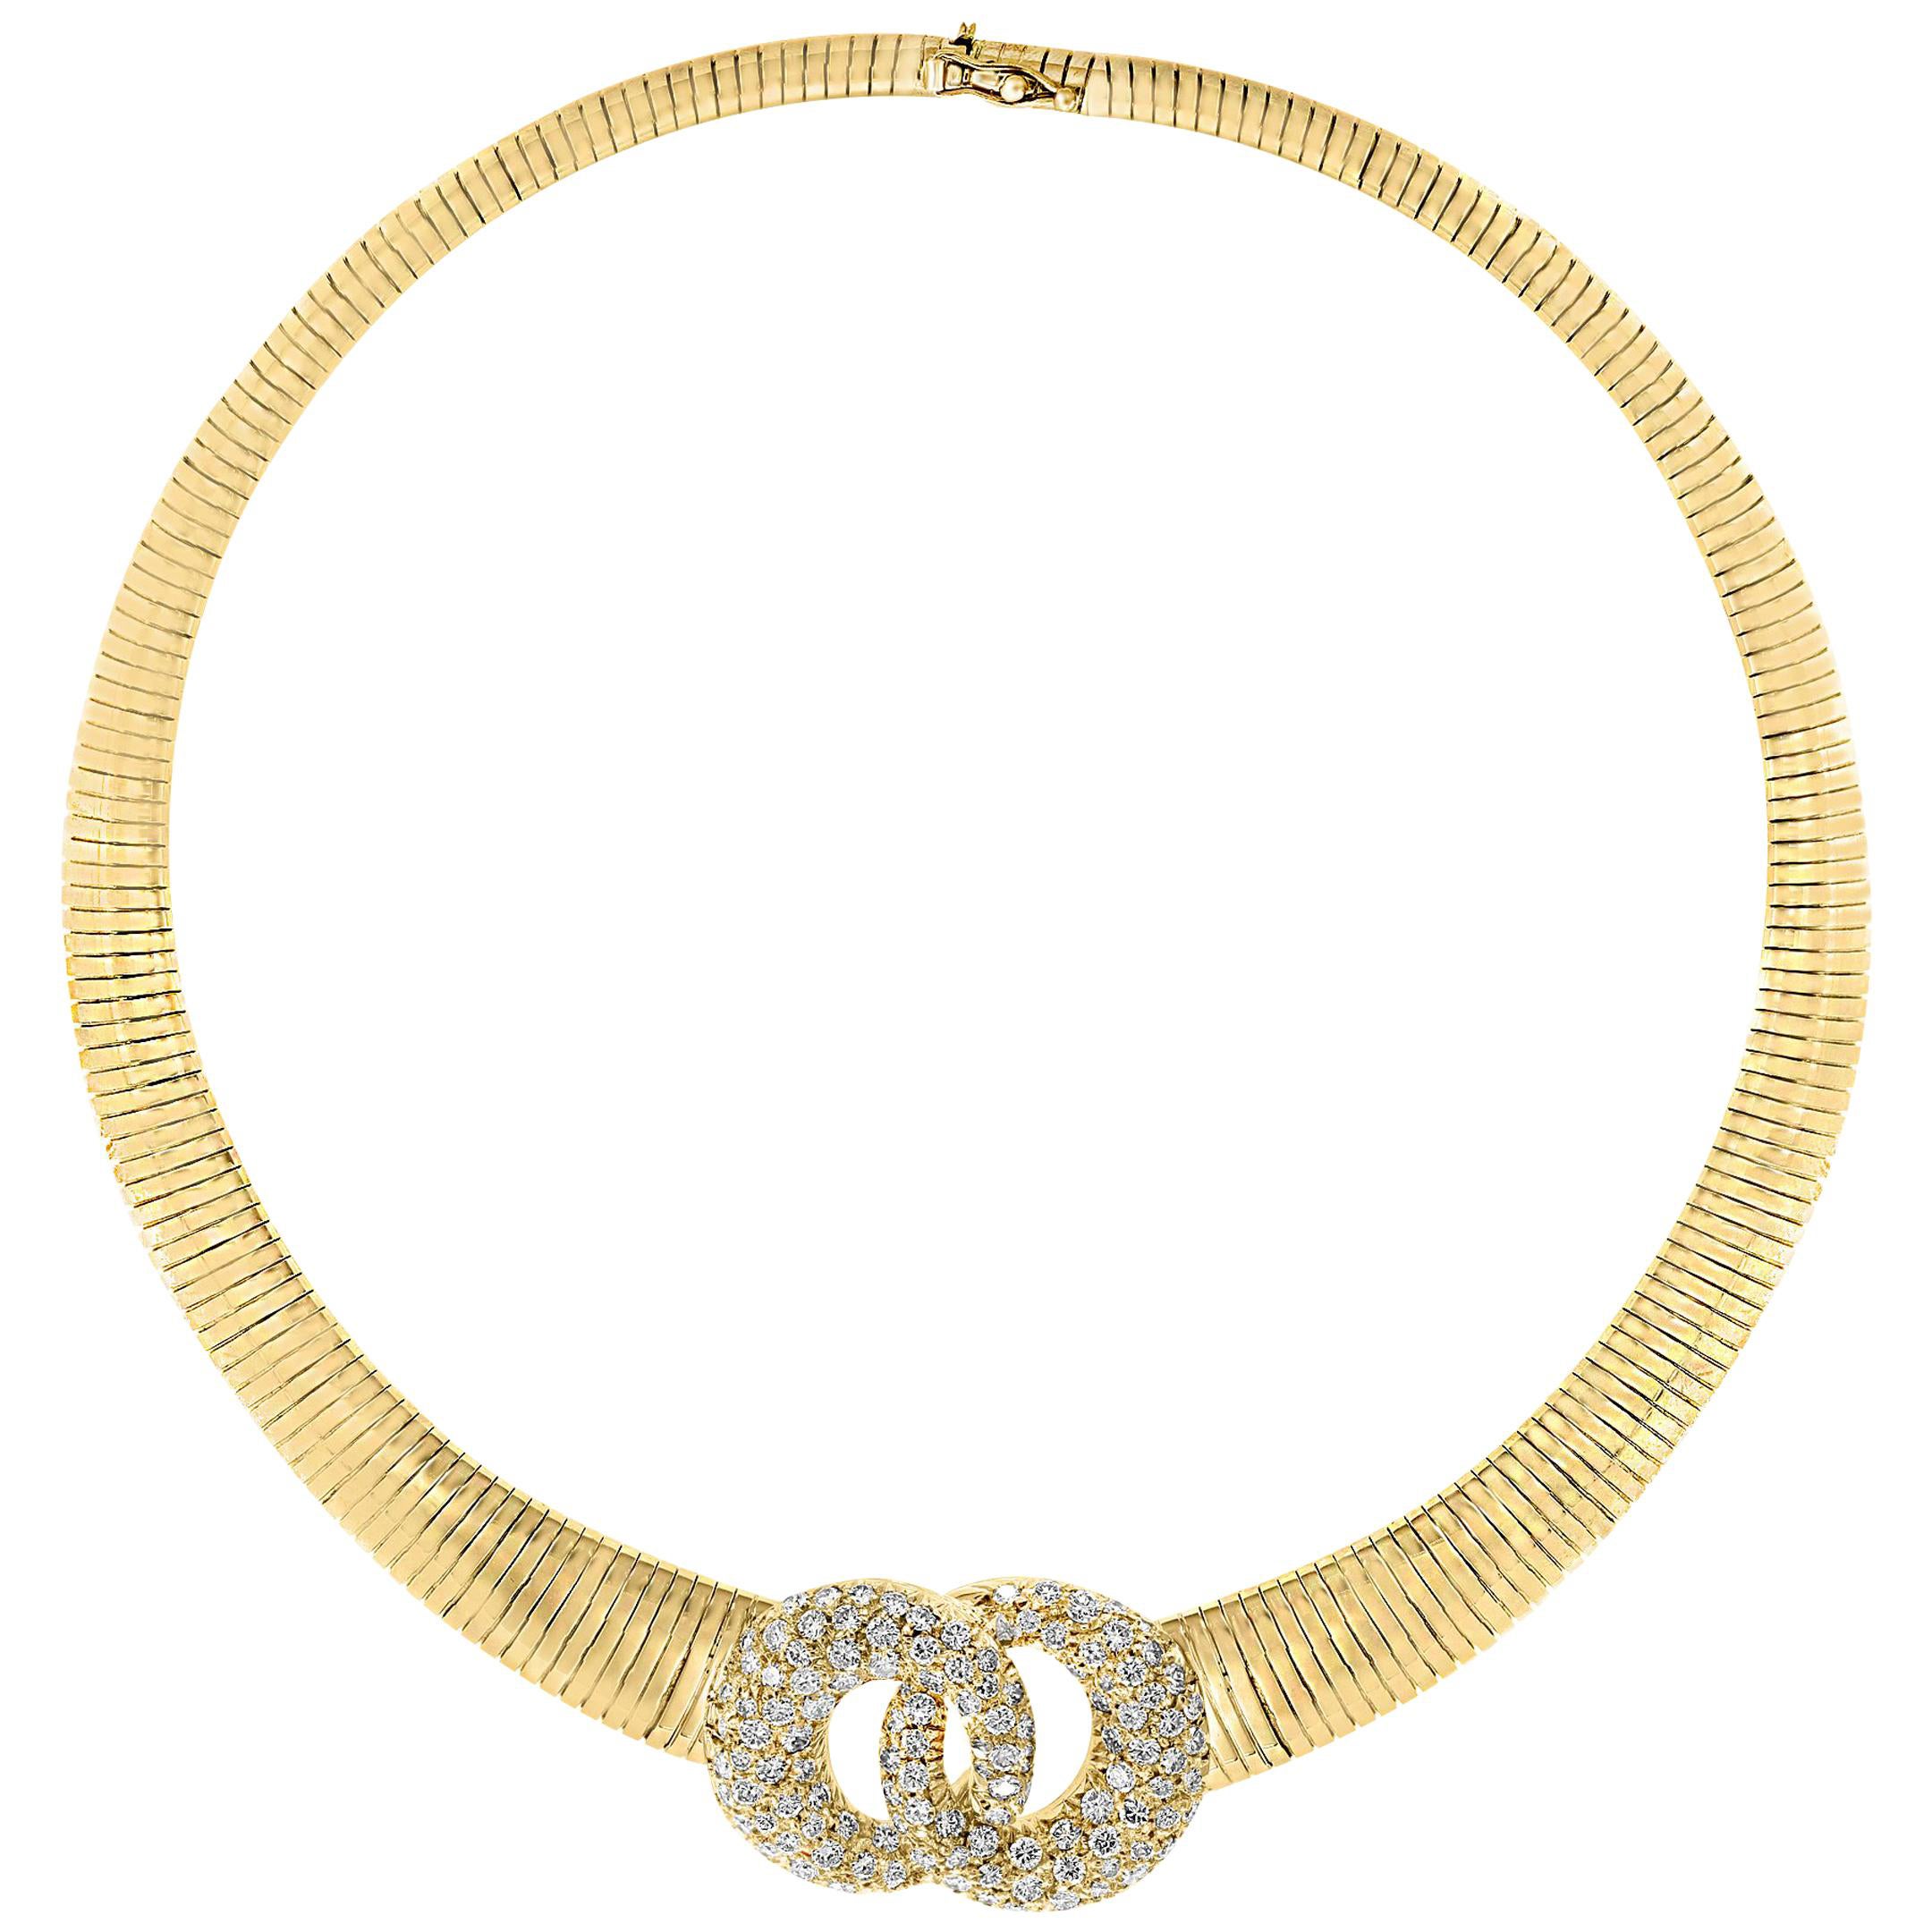 Van Cleef & Arpels 18 Carat Yellow Gold and 6 Ct Diamond Collar/Choker Necklace For Sale